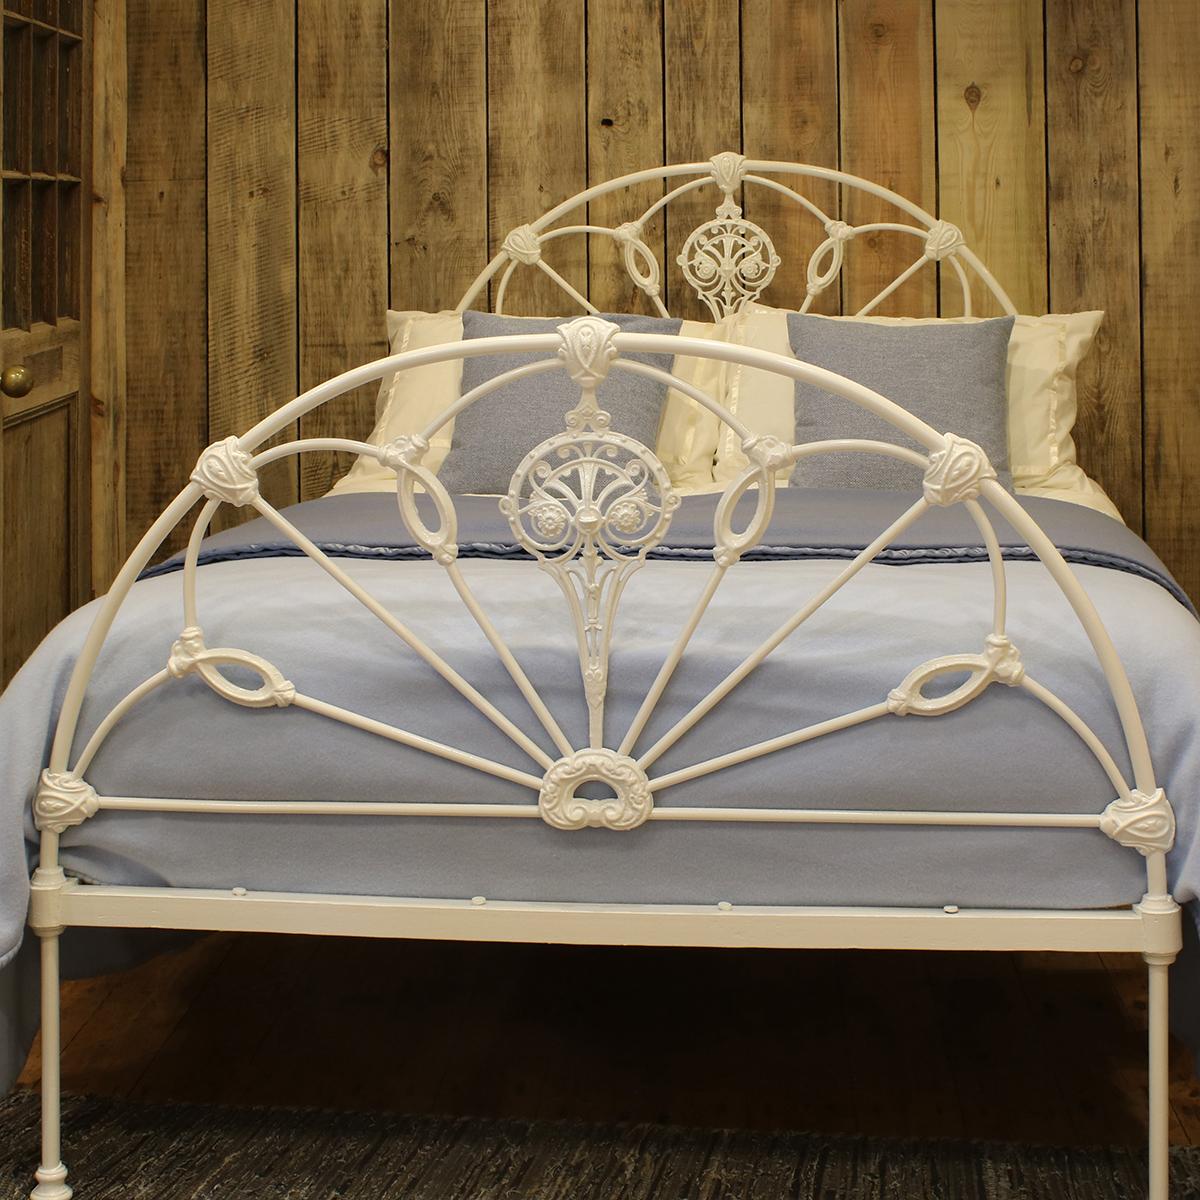 A superb example of a Victorian cast iron double bed attributed to the leading manufacturer of cast iron beds, R W Winfield of Birmingham UK, finished in 